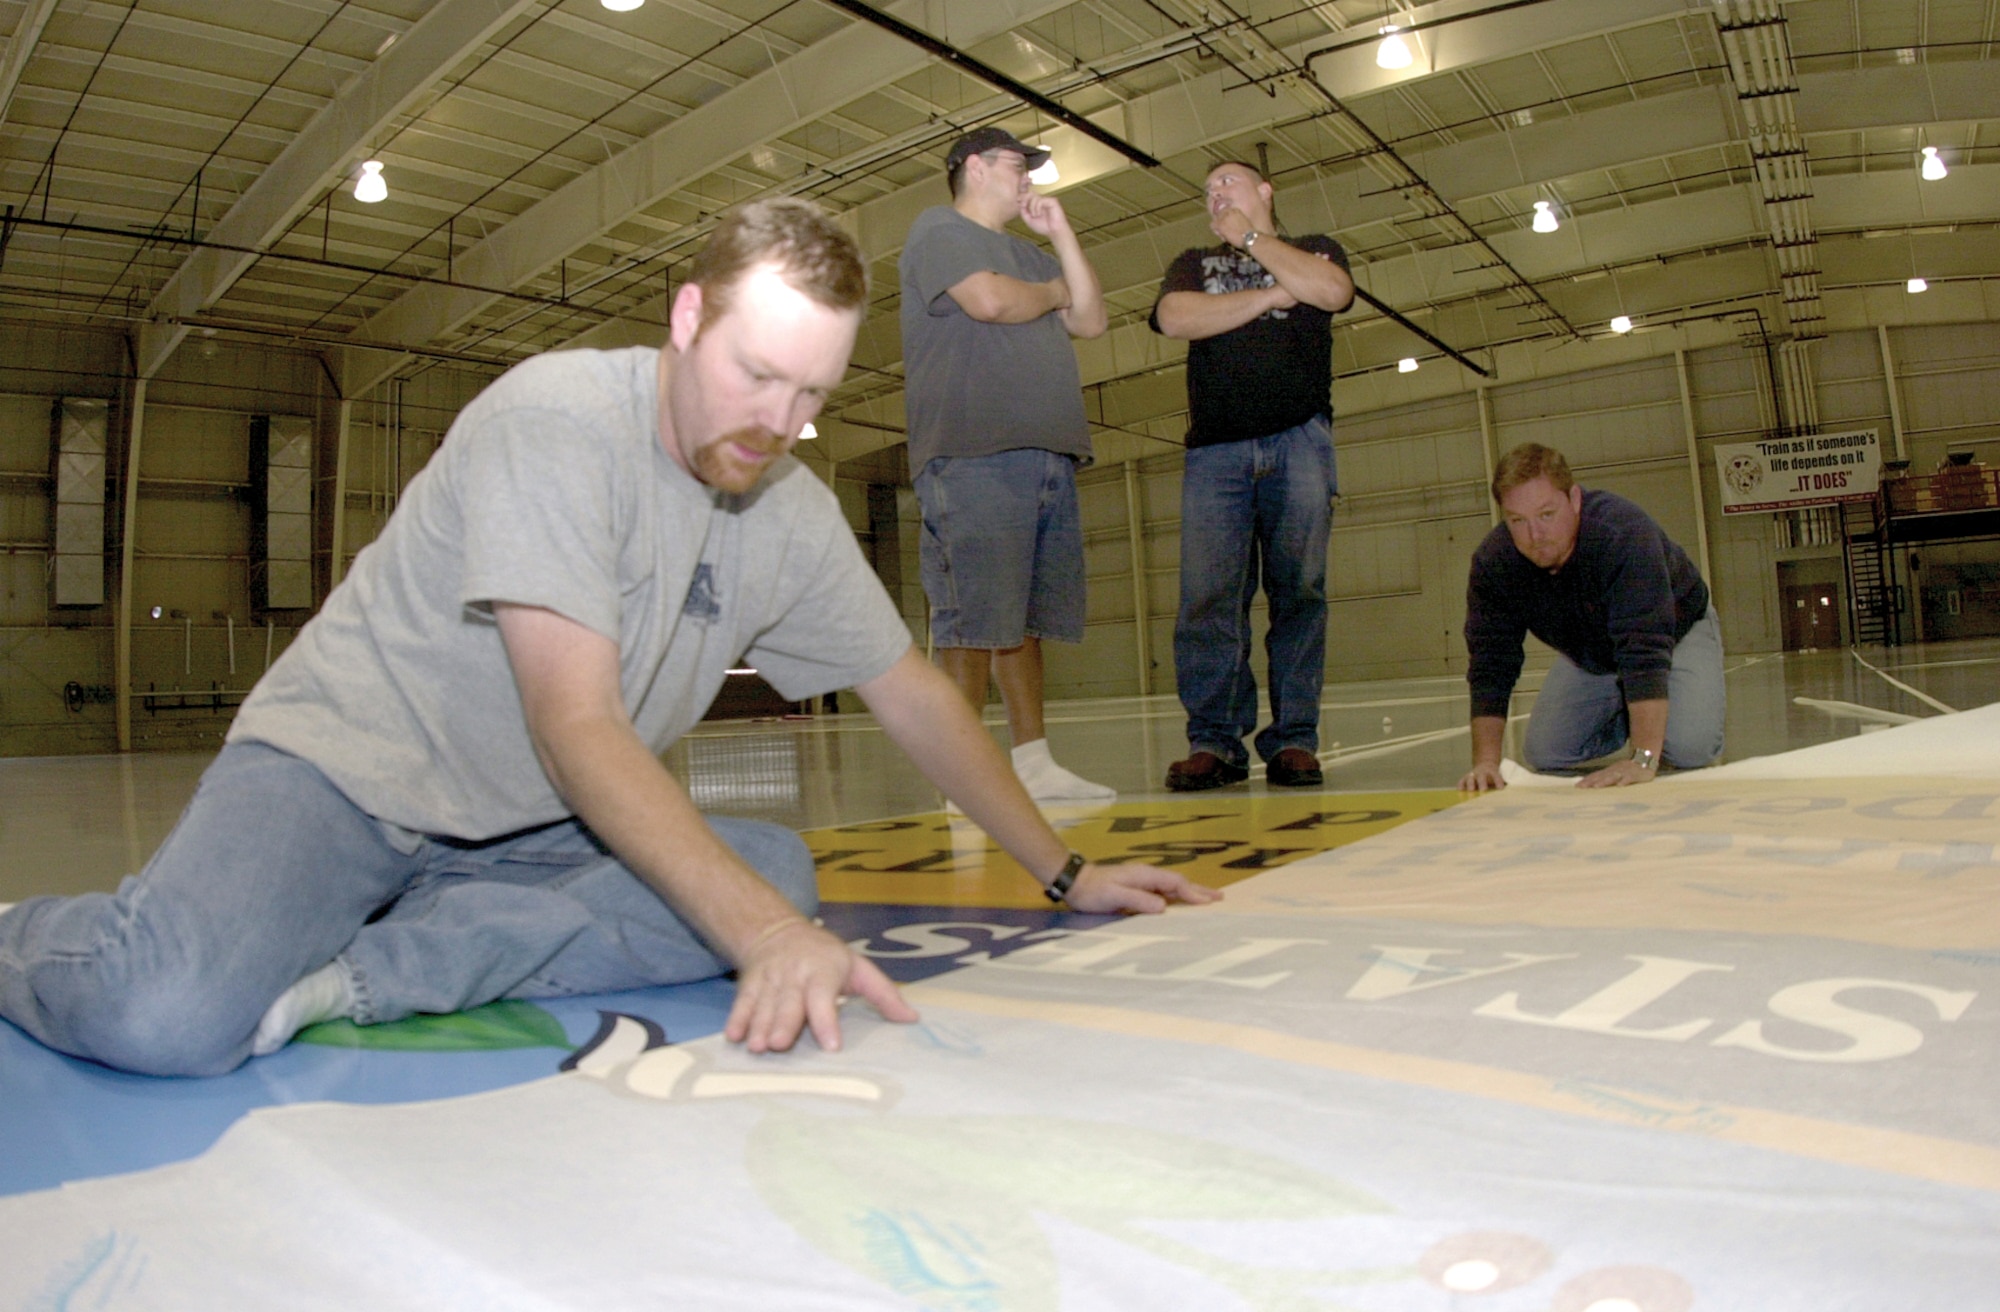 Will Charlesworth (far right) and Travis Turner, co-owners of All About Signs, lay down another section of the large decal now located on the west side of the Louis F. Garland Department of Defense Fire Academy high bay Jan. 12, 2007.  Decal installers Perry Dominguez (wearing baseball cap) and Carlos Carillo stand in the background.  The decal is of the official emblem for Fire & Emergency Services under the Department of Defense.  The decal has a radius of 25 feet.

The decal is part of the renovation done to the fire academy high bay, which began Dec. 31, 2006 and was completed Jan. 13, 2007.  (U.S. Air Force photo by Airman 1st Class Luis Loza Gutierrez)